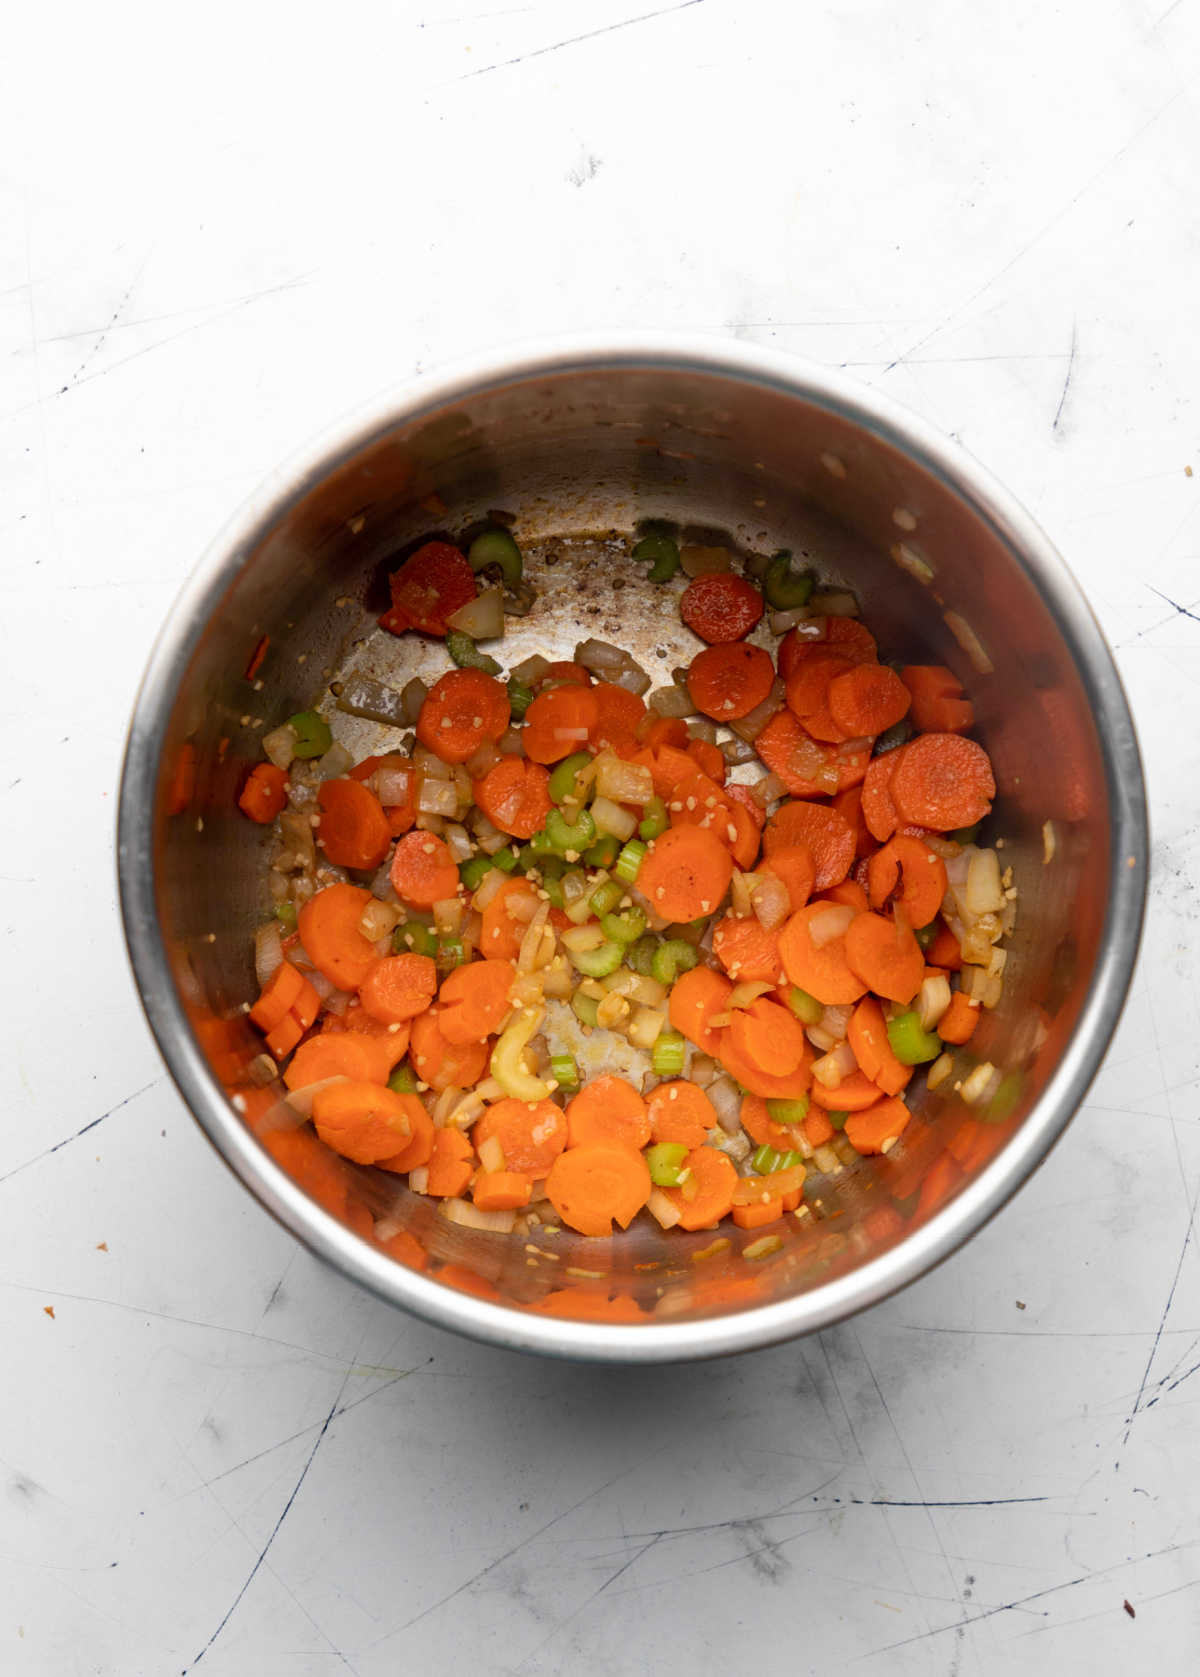 Onions celery and carrot sauteeing in an Instant Pot.